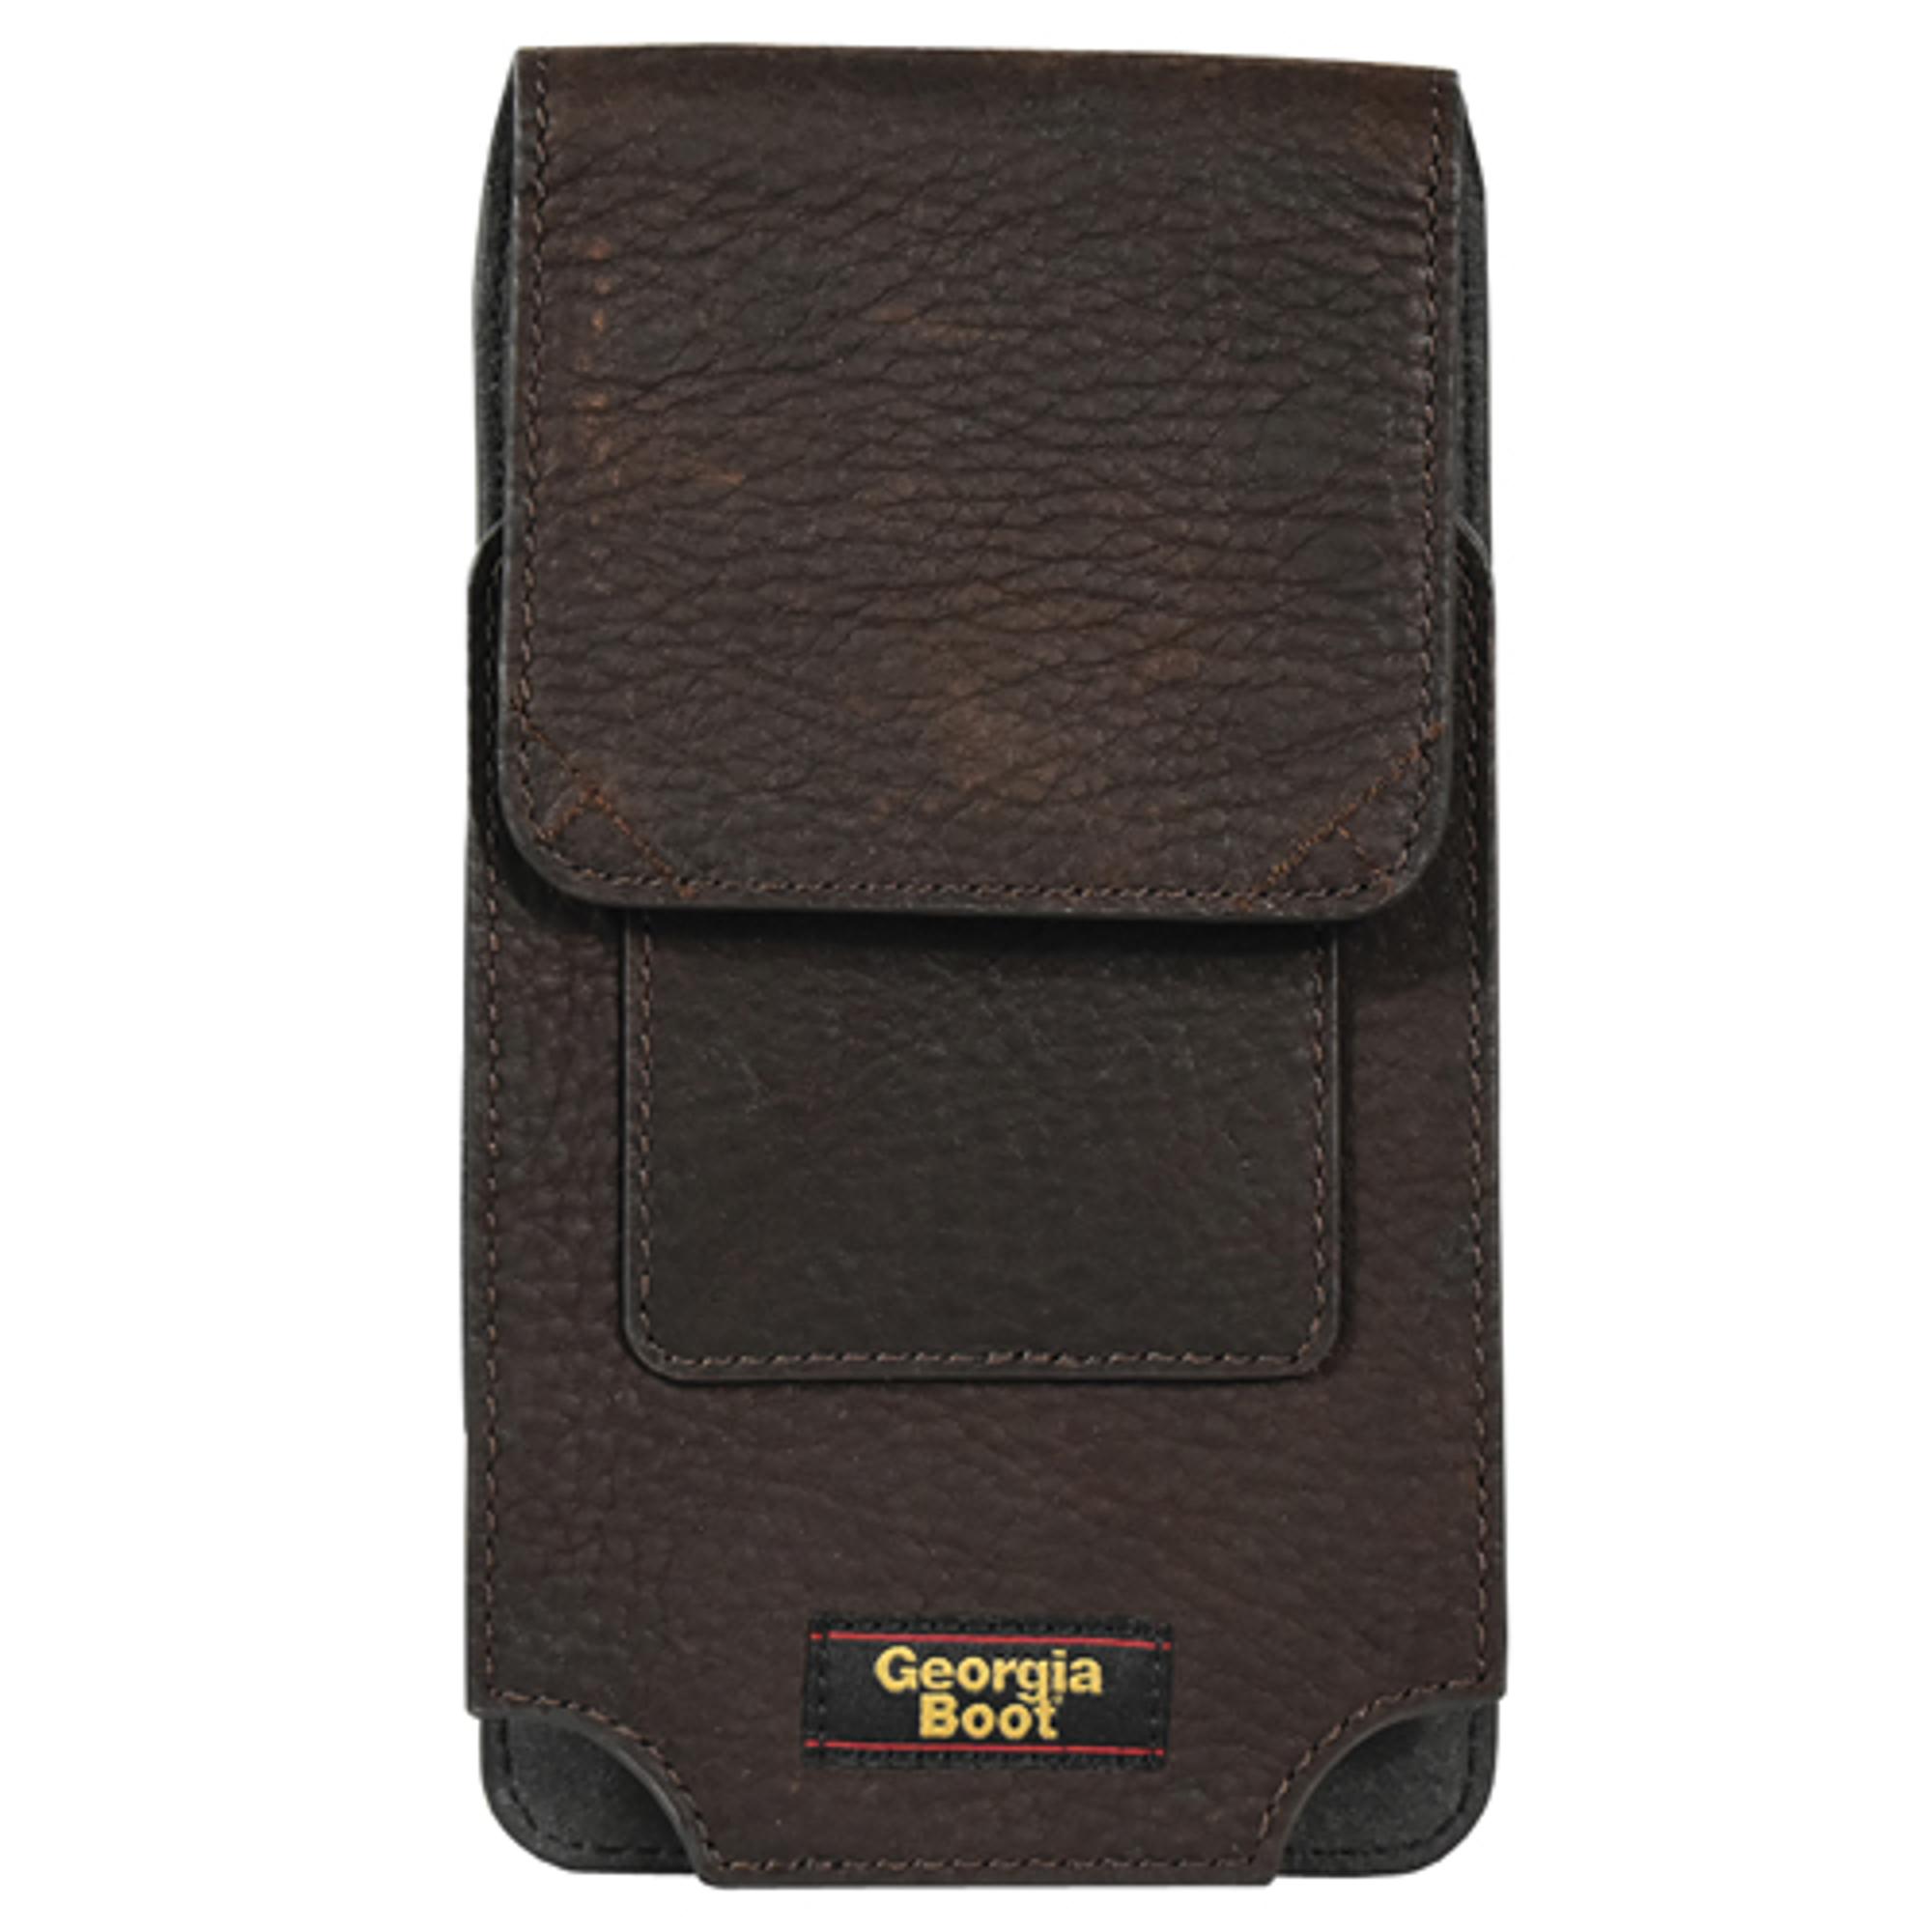 Georgia Boot Leather Phone Case Carrier